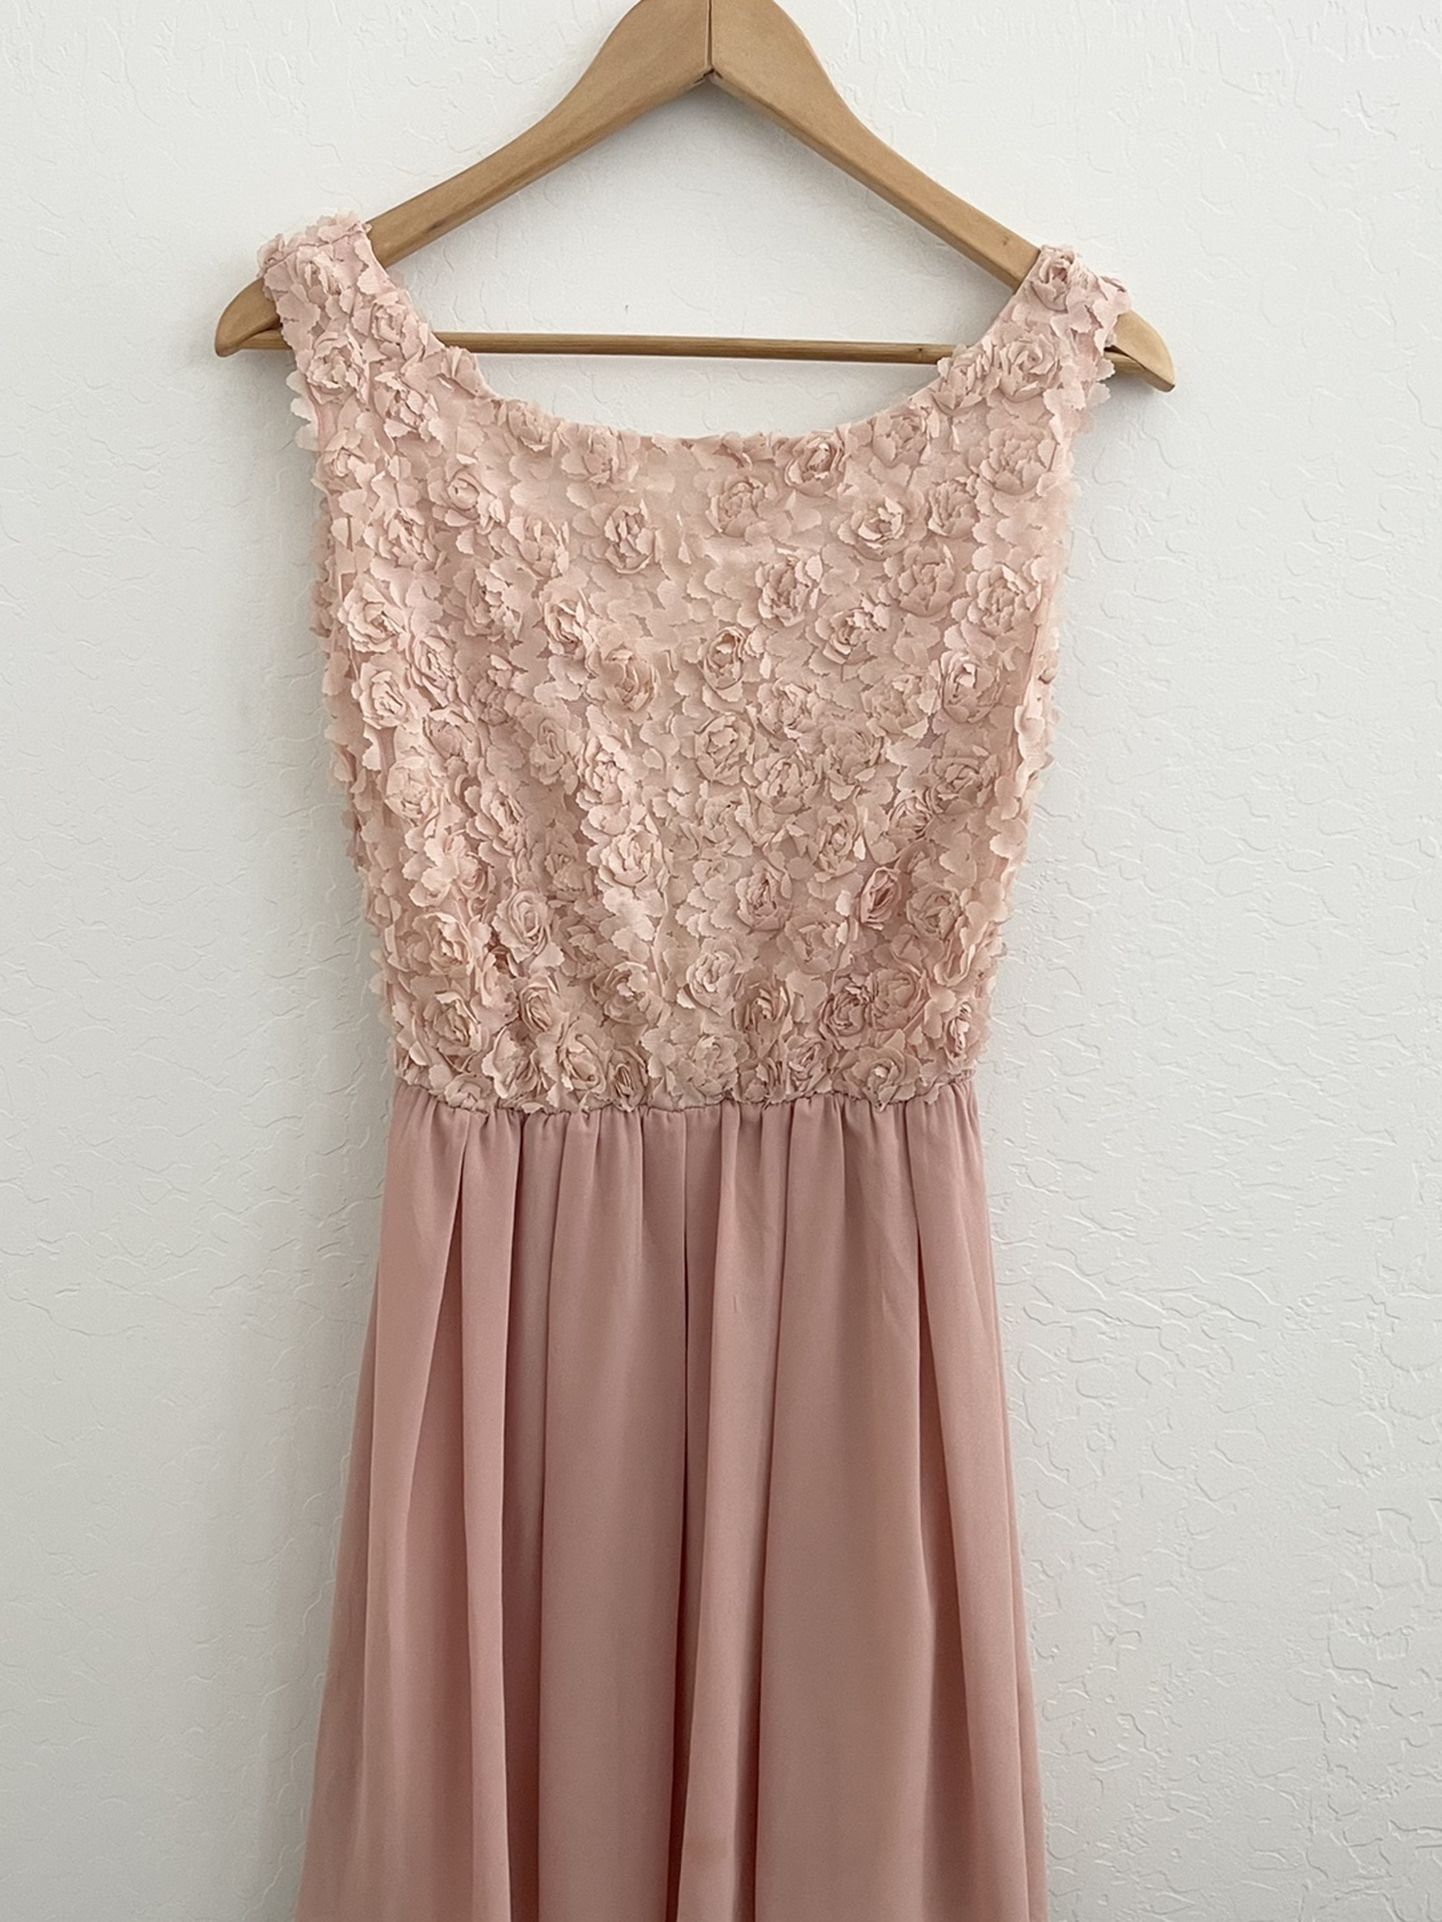 Muted Pink Bridesmaid Dress - Size Small